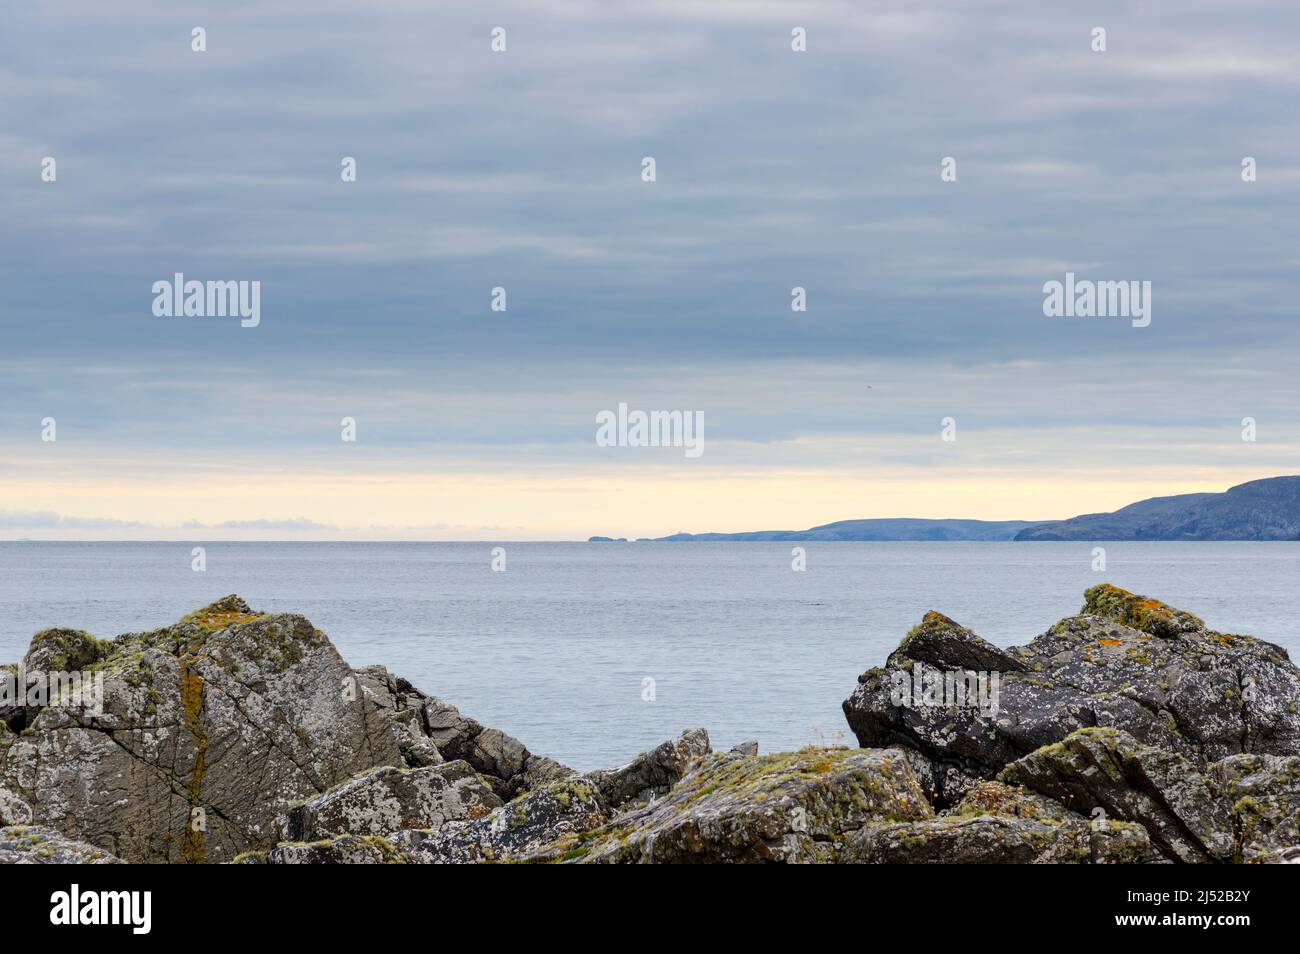 On an overcast but clear day, the coastline leads to the distant Strathay Point and lighthouse just visible on the horizon. Seen from near Skerray Bay Stock Photo